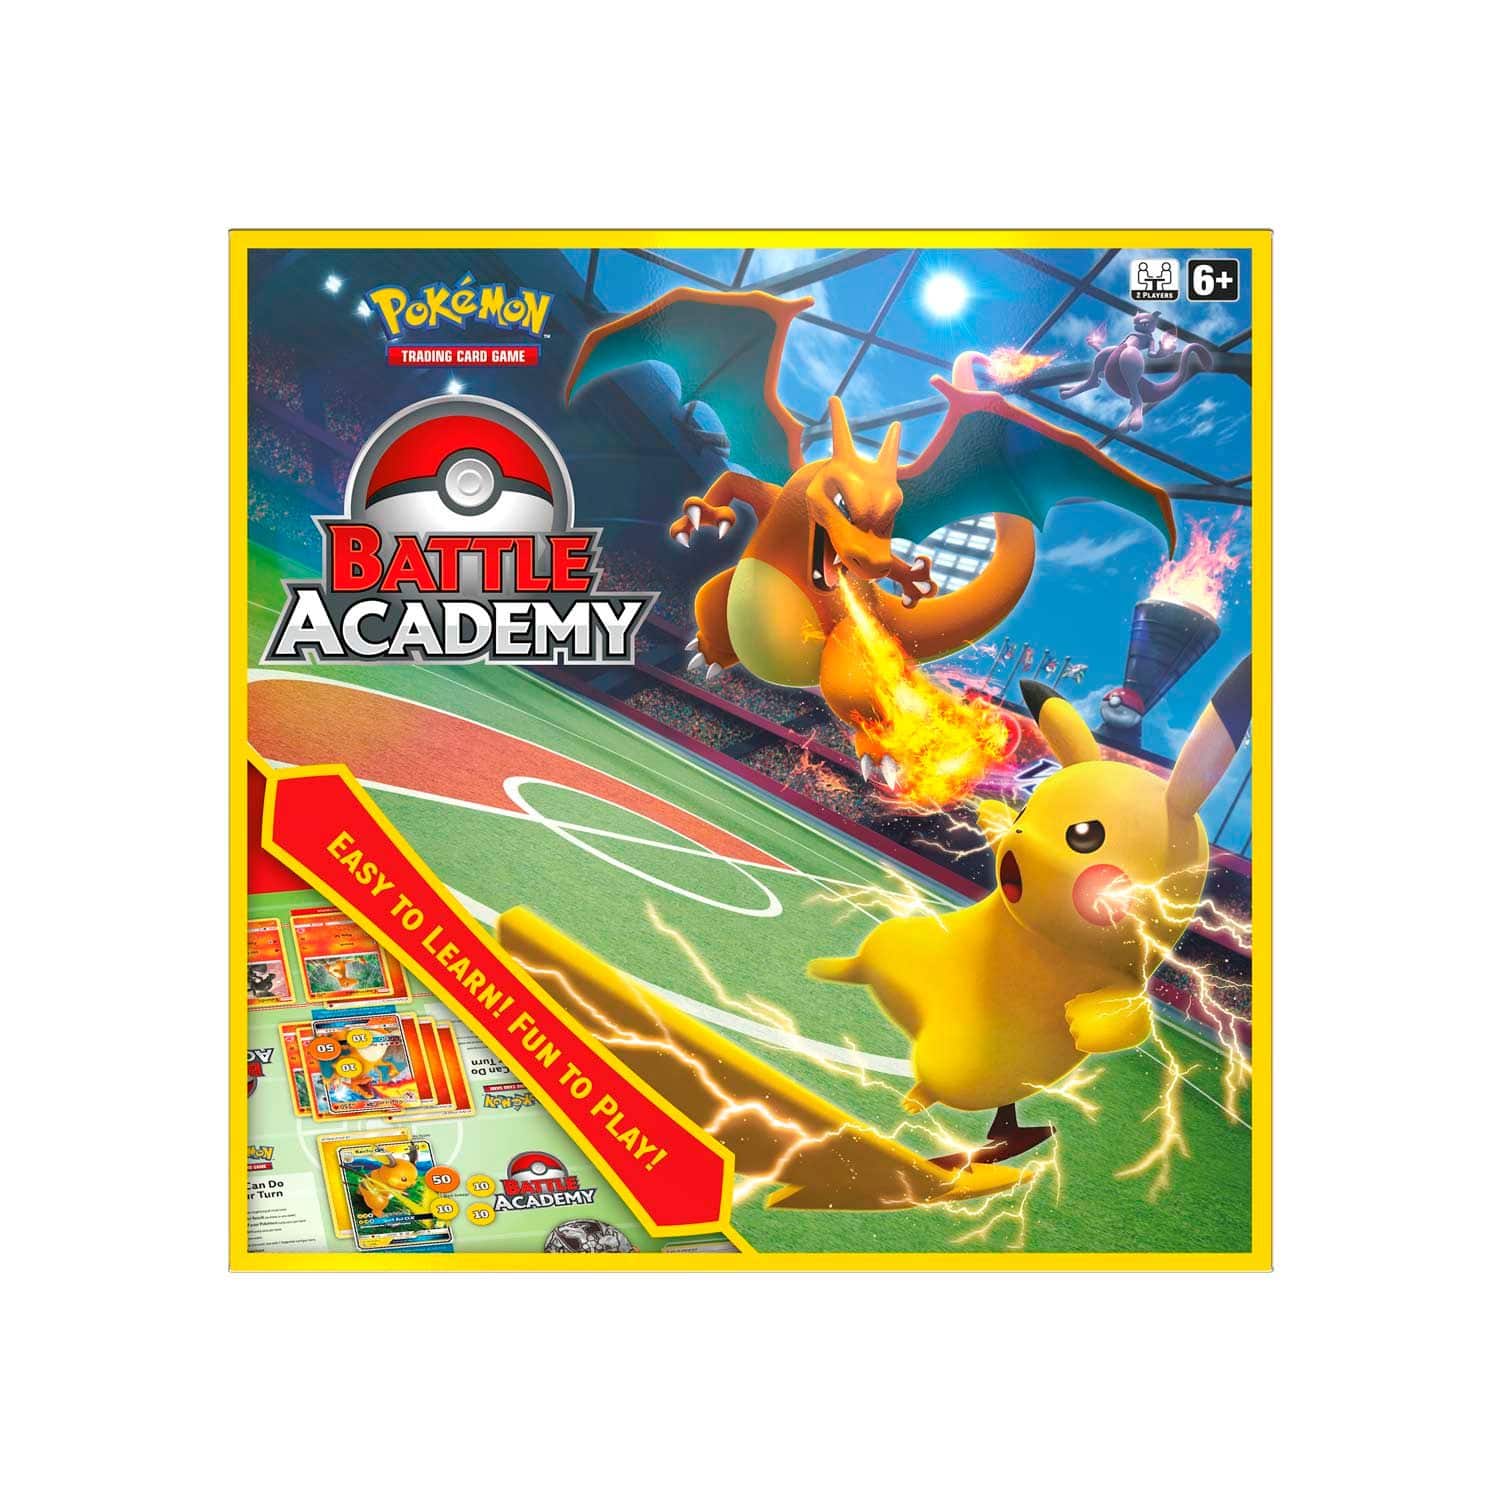 Pokémon Battle Academy Trading Card Game For Kids & Youths